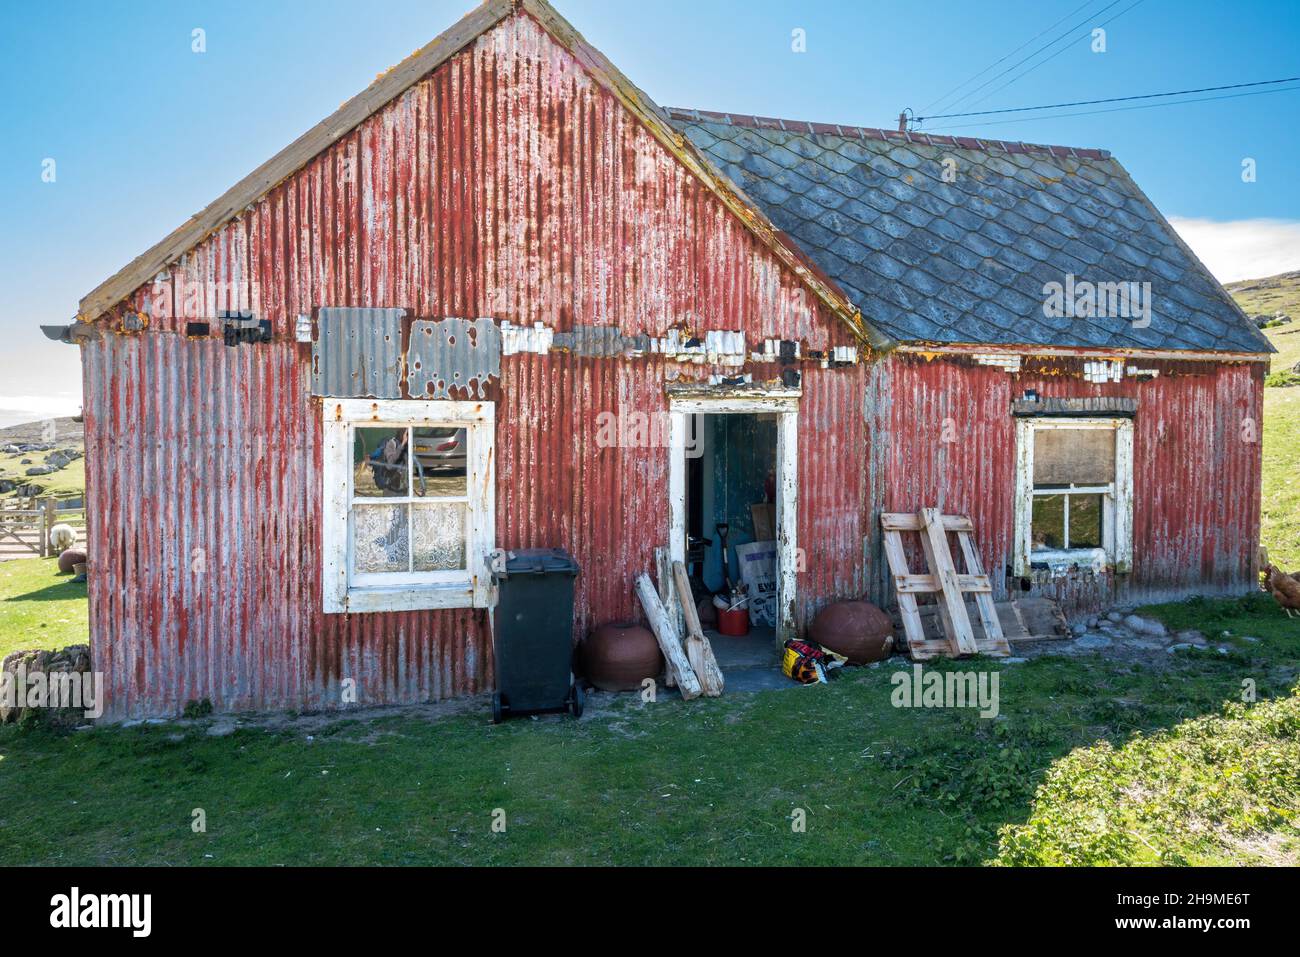 An old rusty corrugated iron building at the remote croft community of Hushinish on the isle of Harris in the Outer Hebrides, Scotland, UK Stock Photo